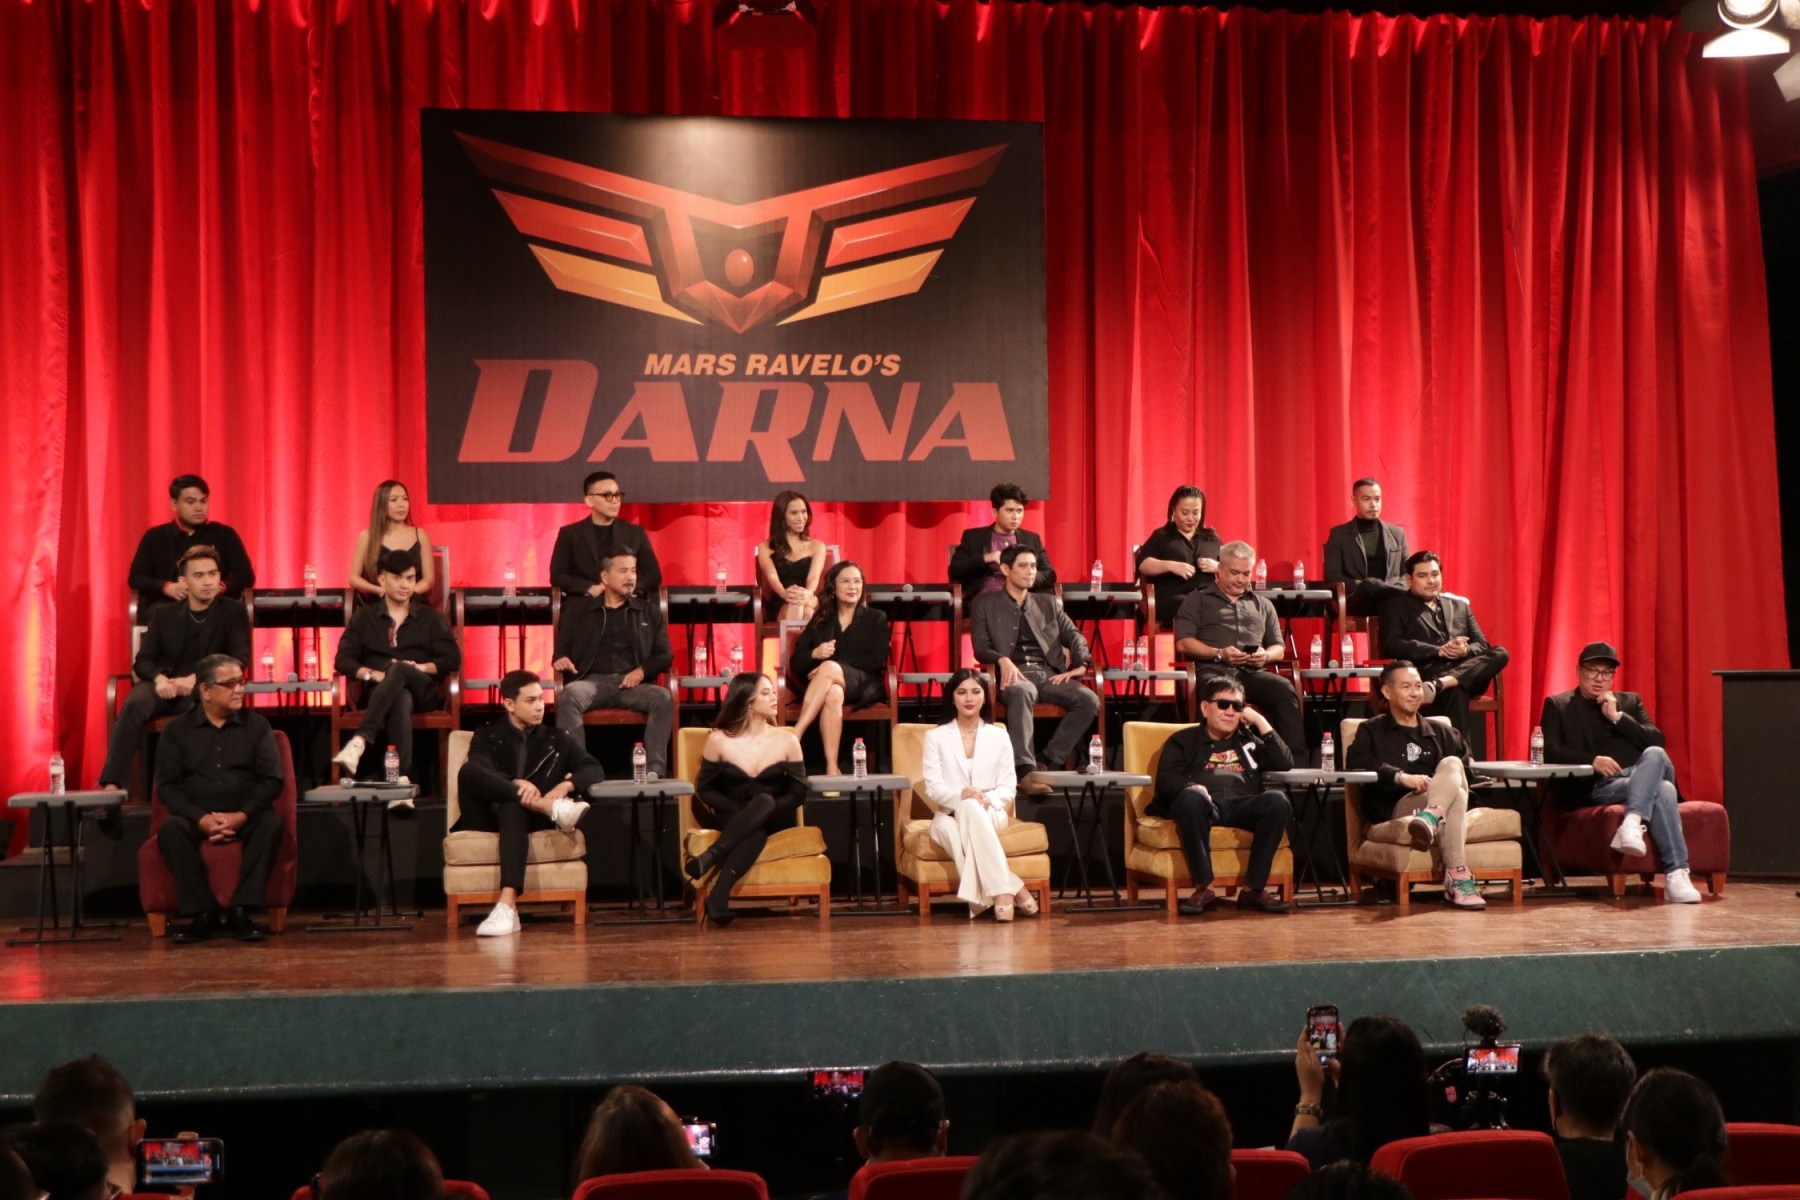 Darna Grand Media Conference held at ABS CBN Dolphy Theater